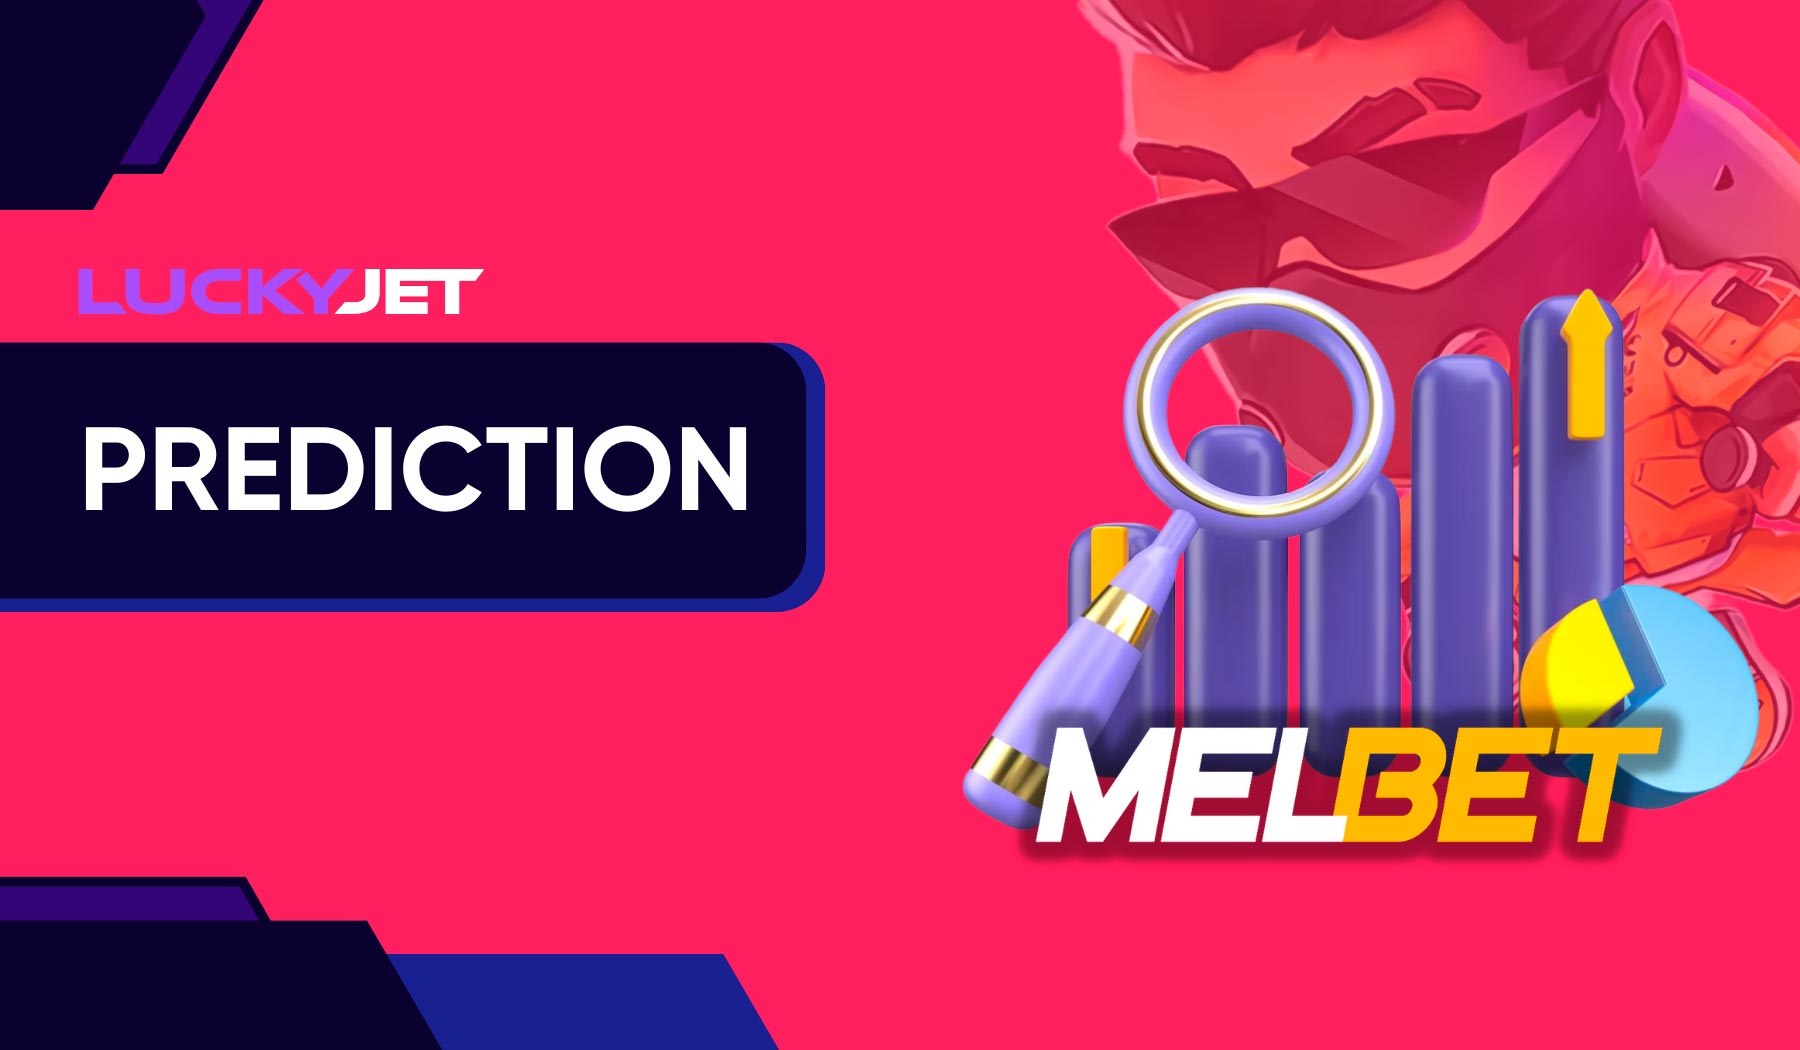 Predicting results in Melbet's Lucky Jet